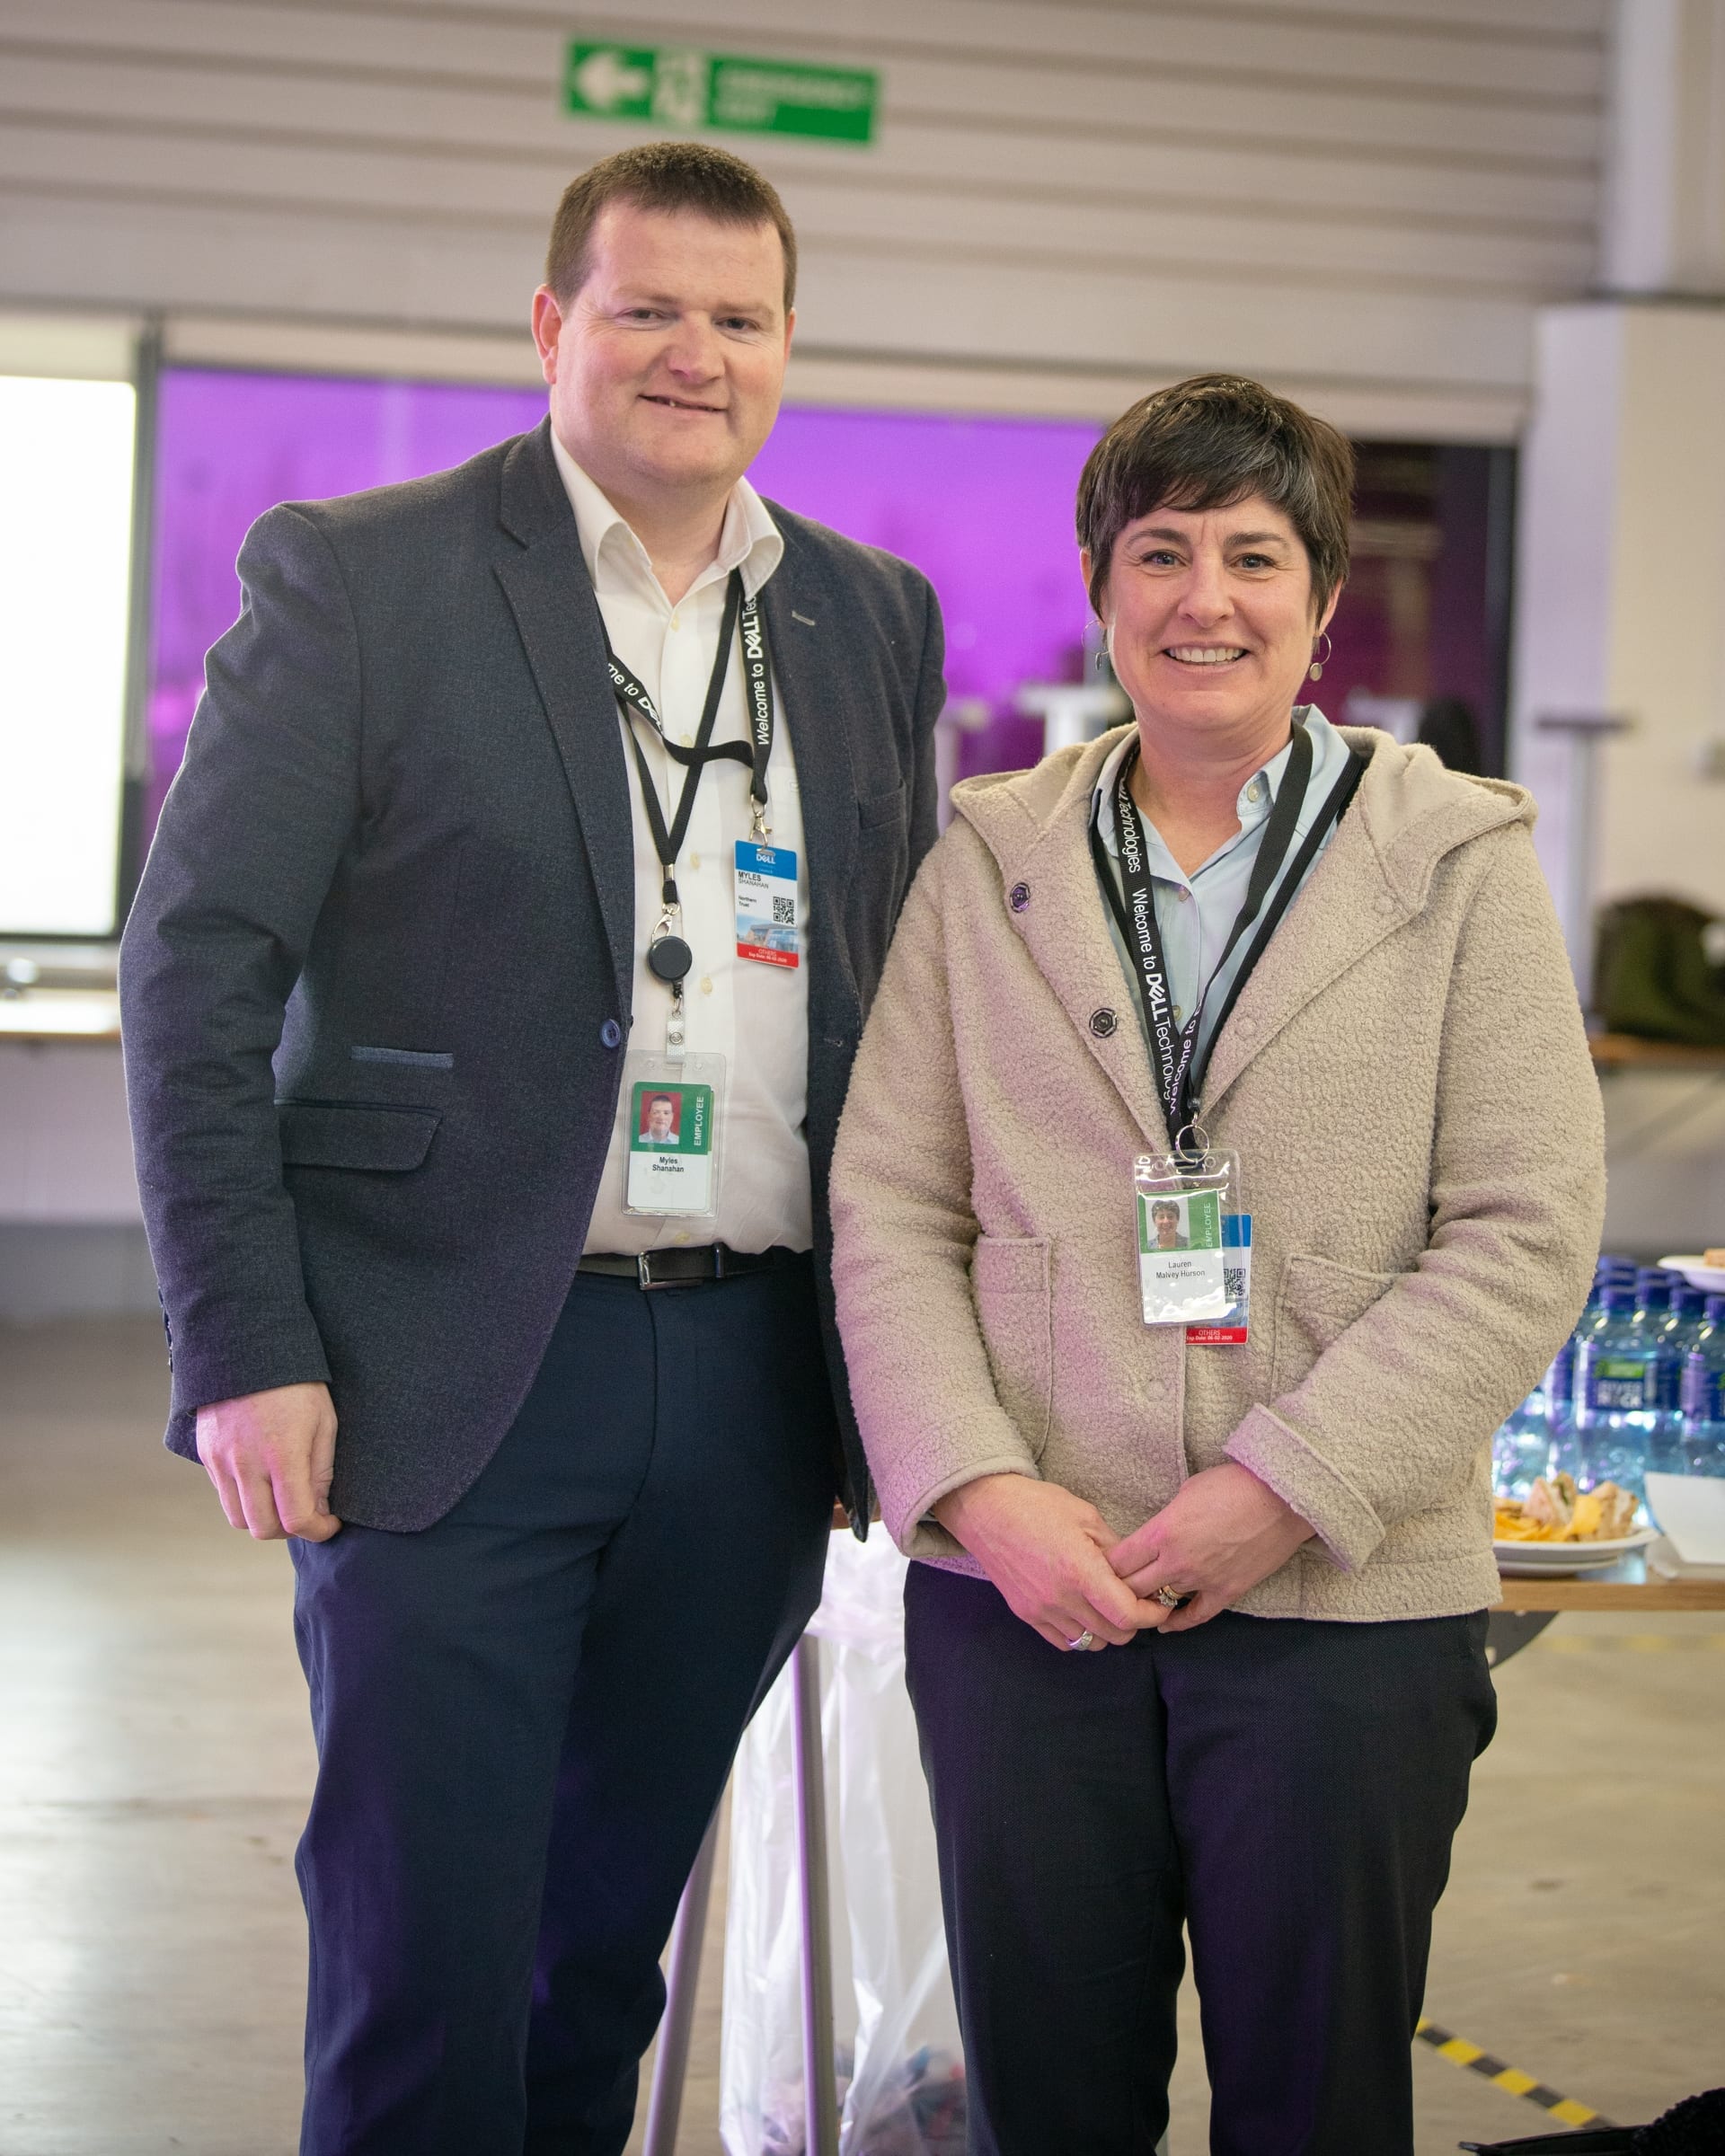 No repro fee-RLP Programme Launch which was held in DELL EMC, Raheen Industrial Est Limerick on Thursday 6th February - From Left to Right: Myles Shanahan and Lauren Hurson both from Northern Trust. 
Photo credit Shauna Kennedy